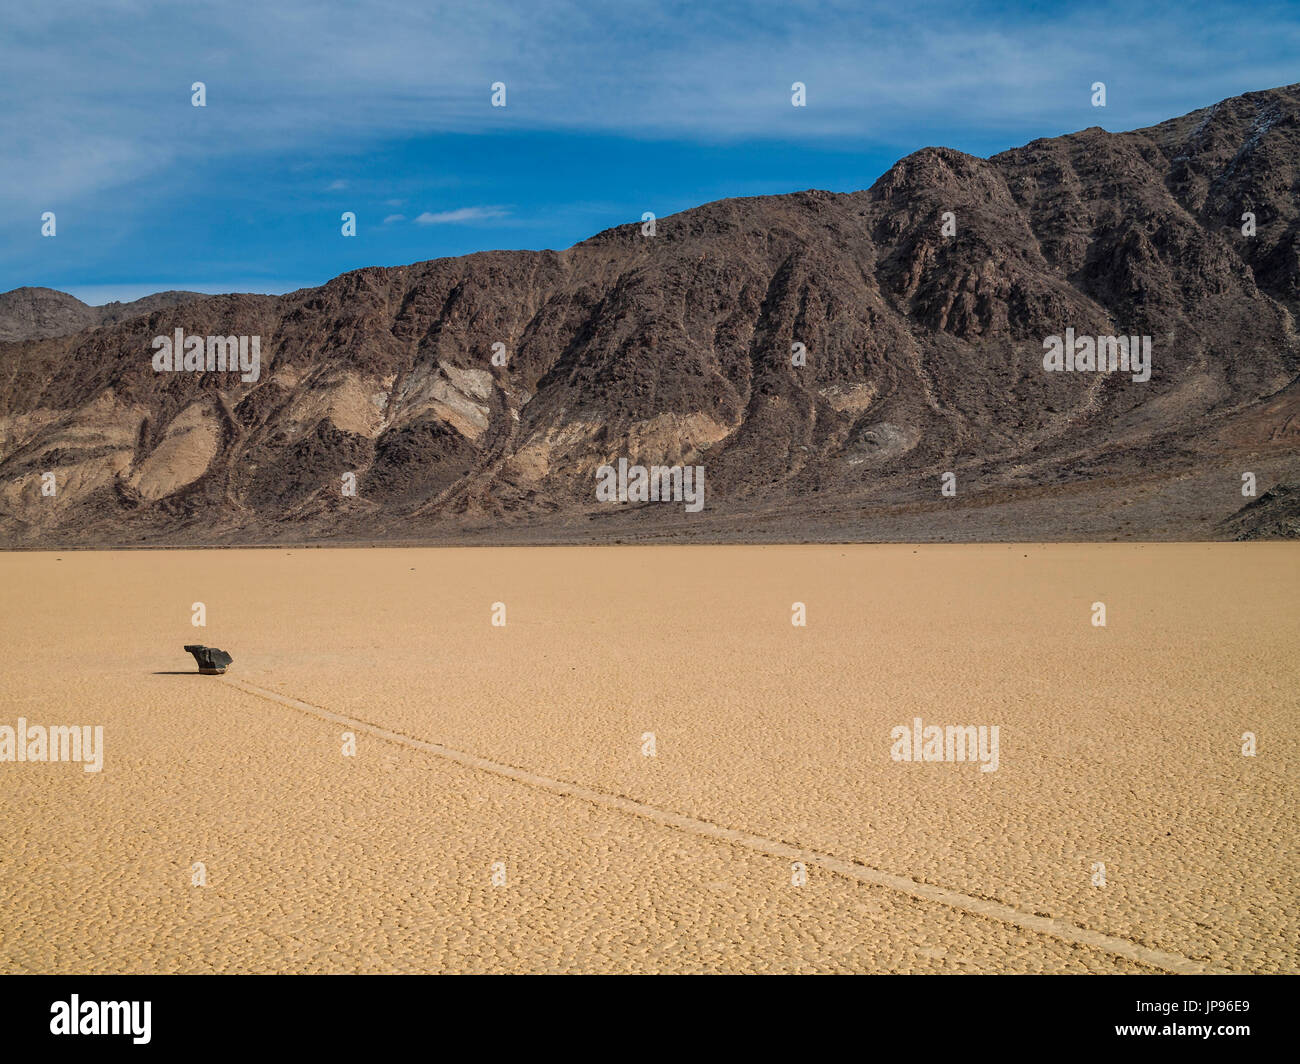 The Racetrack, Death Valley National Park, USA Stock Photo